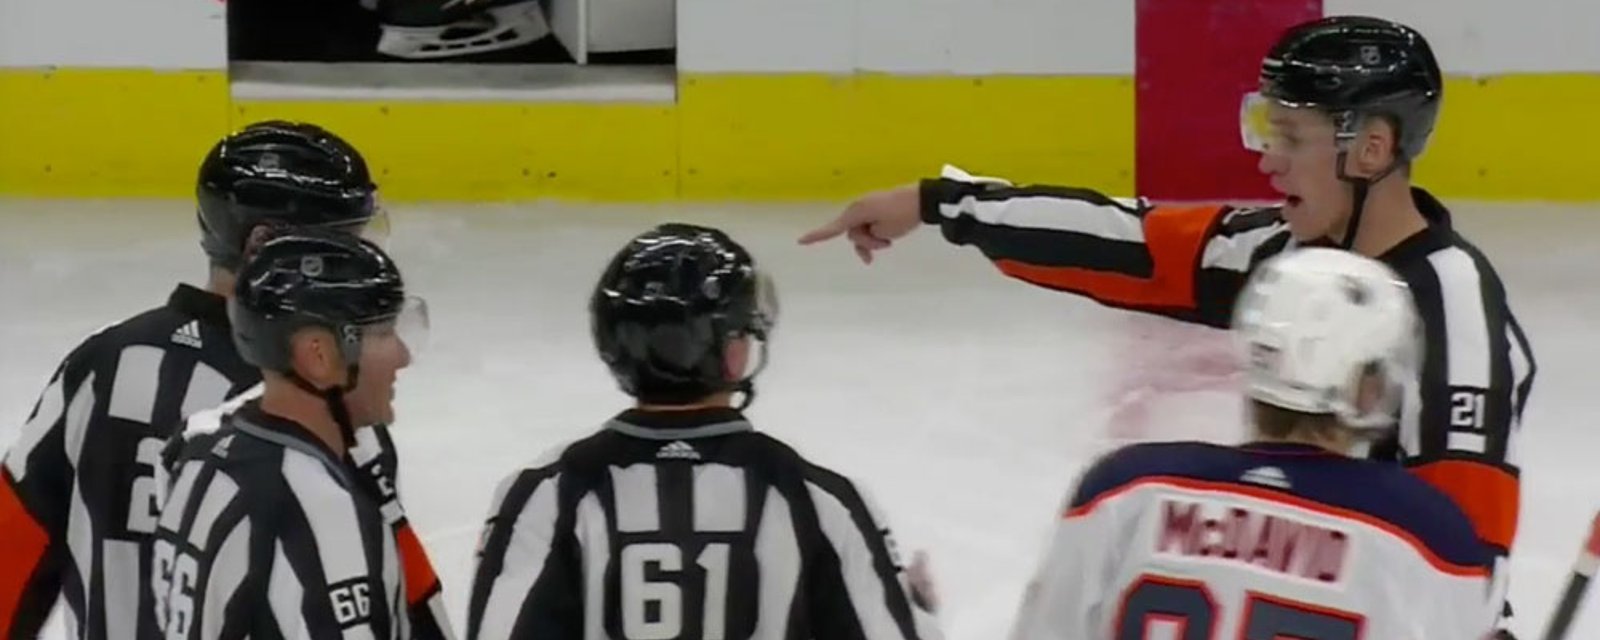 Mic catches Blackhawks bench screaming expletives at confused referees following missed call